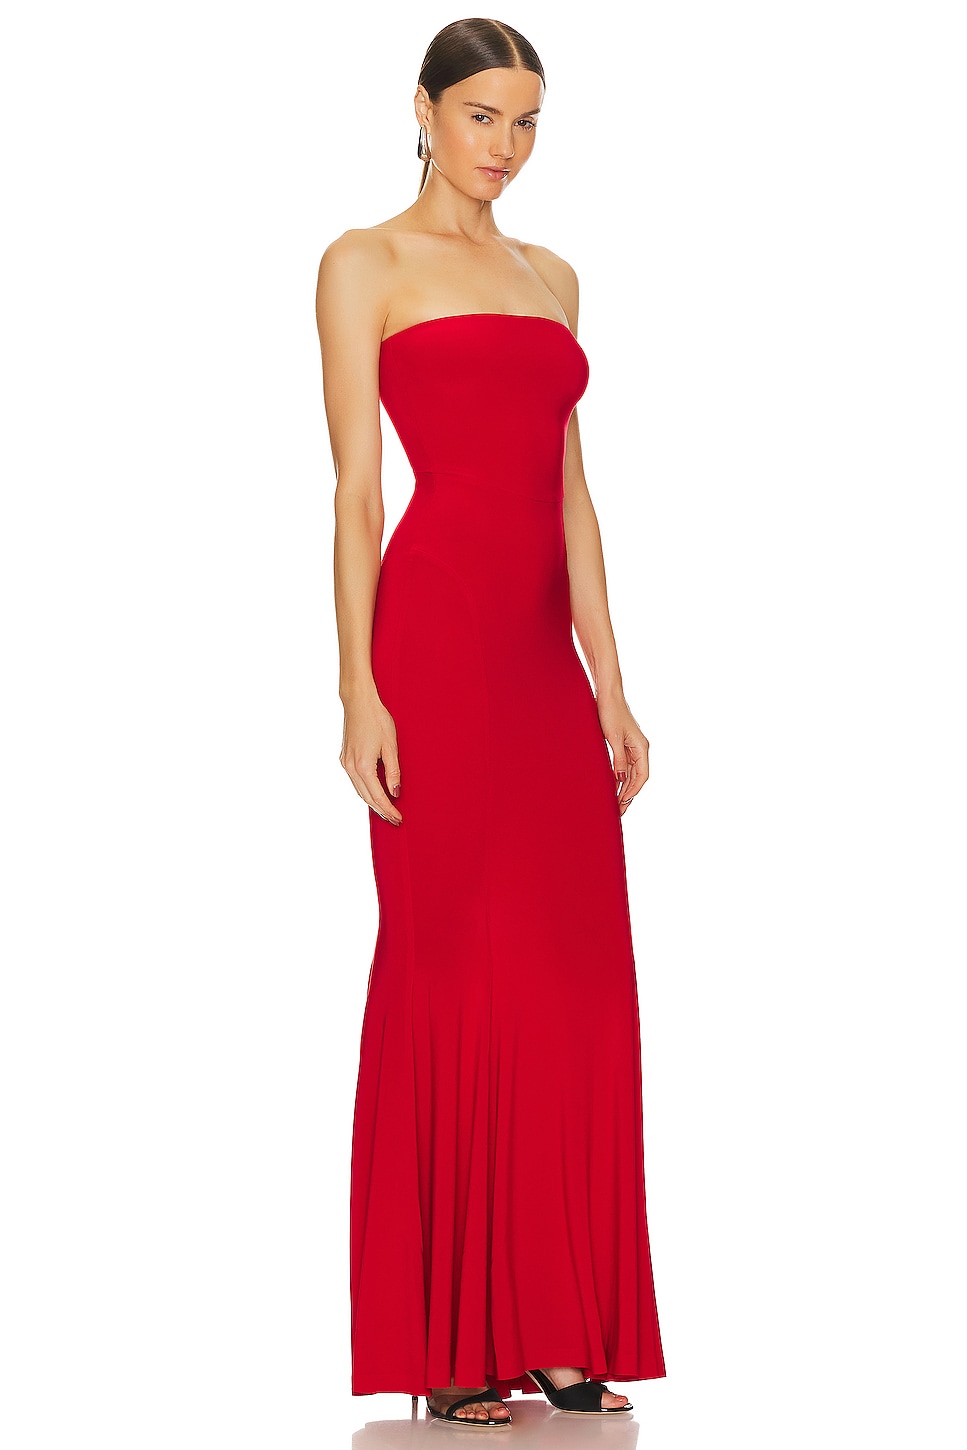 Norma Kamali Strapless Fishtail Gown in Tiger Red | REVOLVE